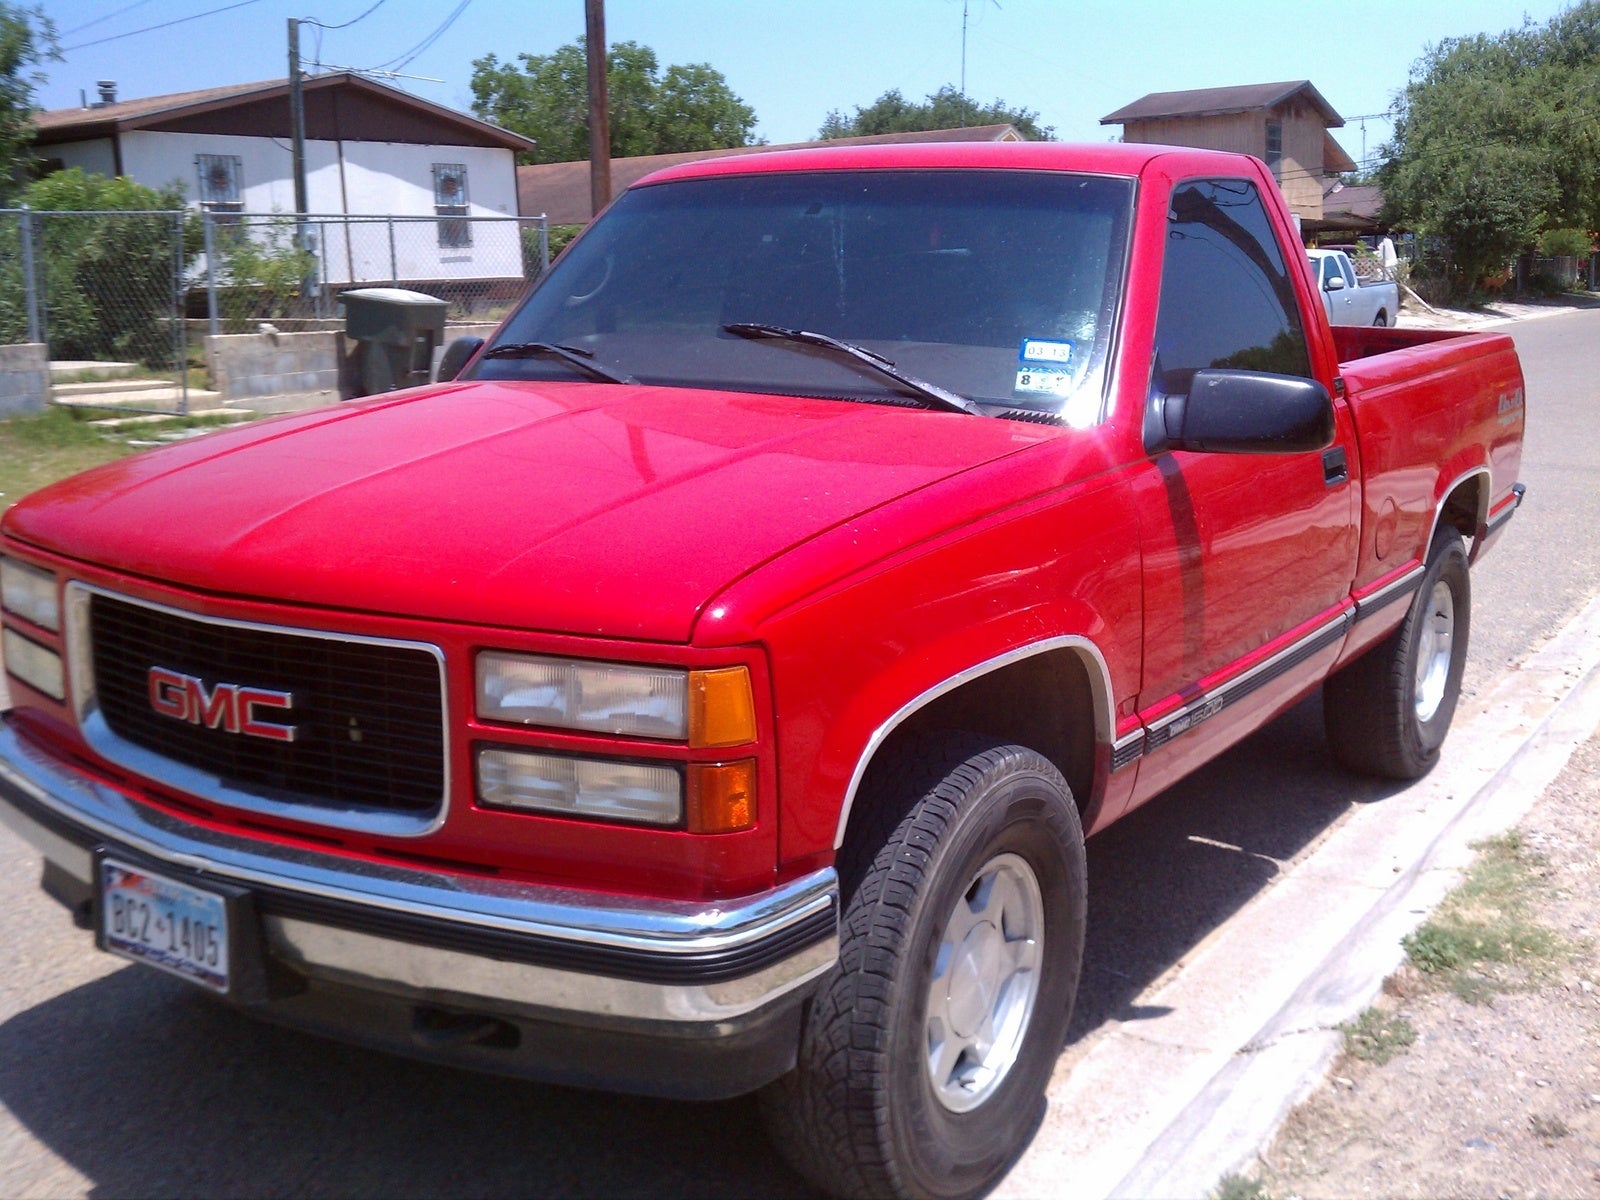 GMC Sierra 1500 Questions - I have a 1997 gmc sierra 1500. I want to